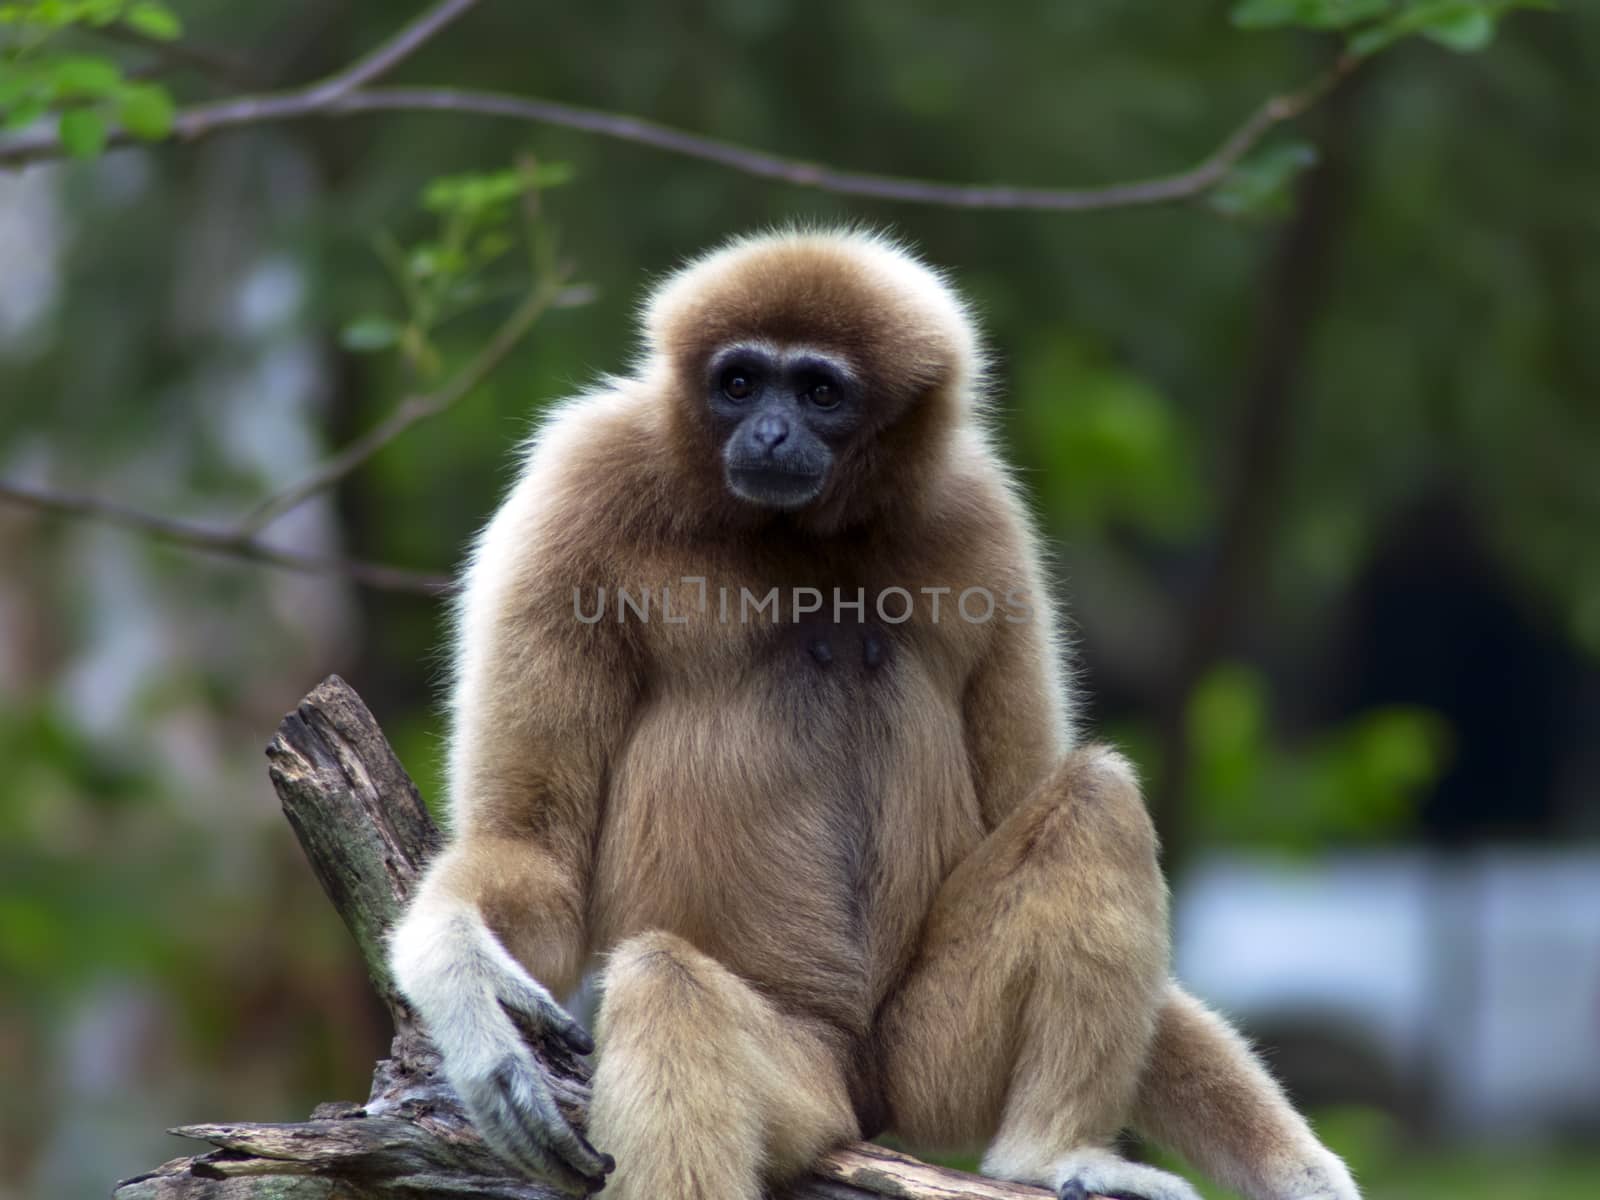 Lar gibbon (Hylobates lar), also known as the white-handed gibbon, is a primate in the gibbon family, Hylobatidae